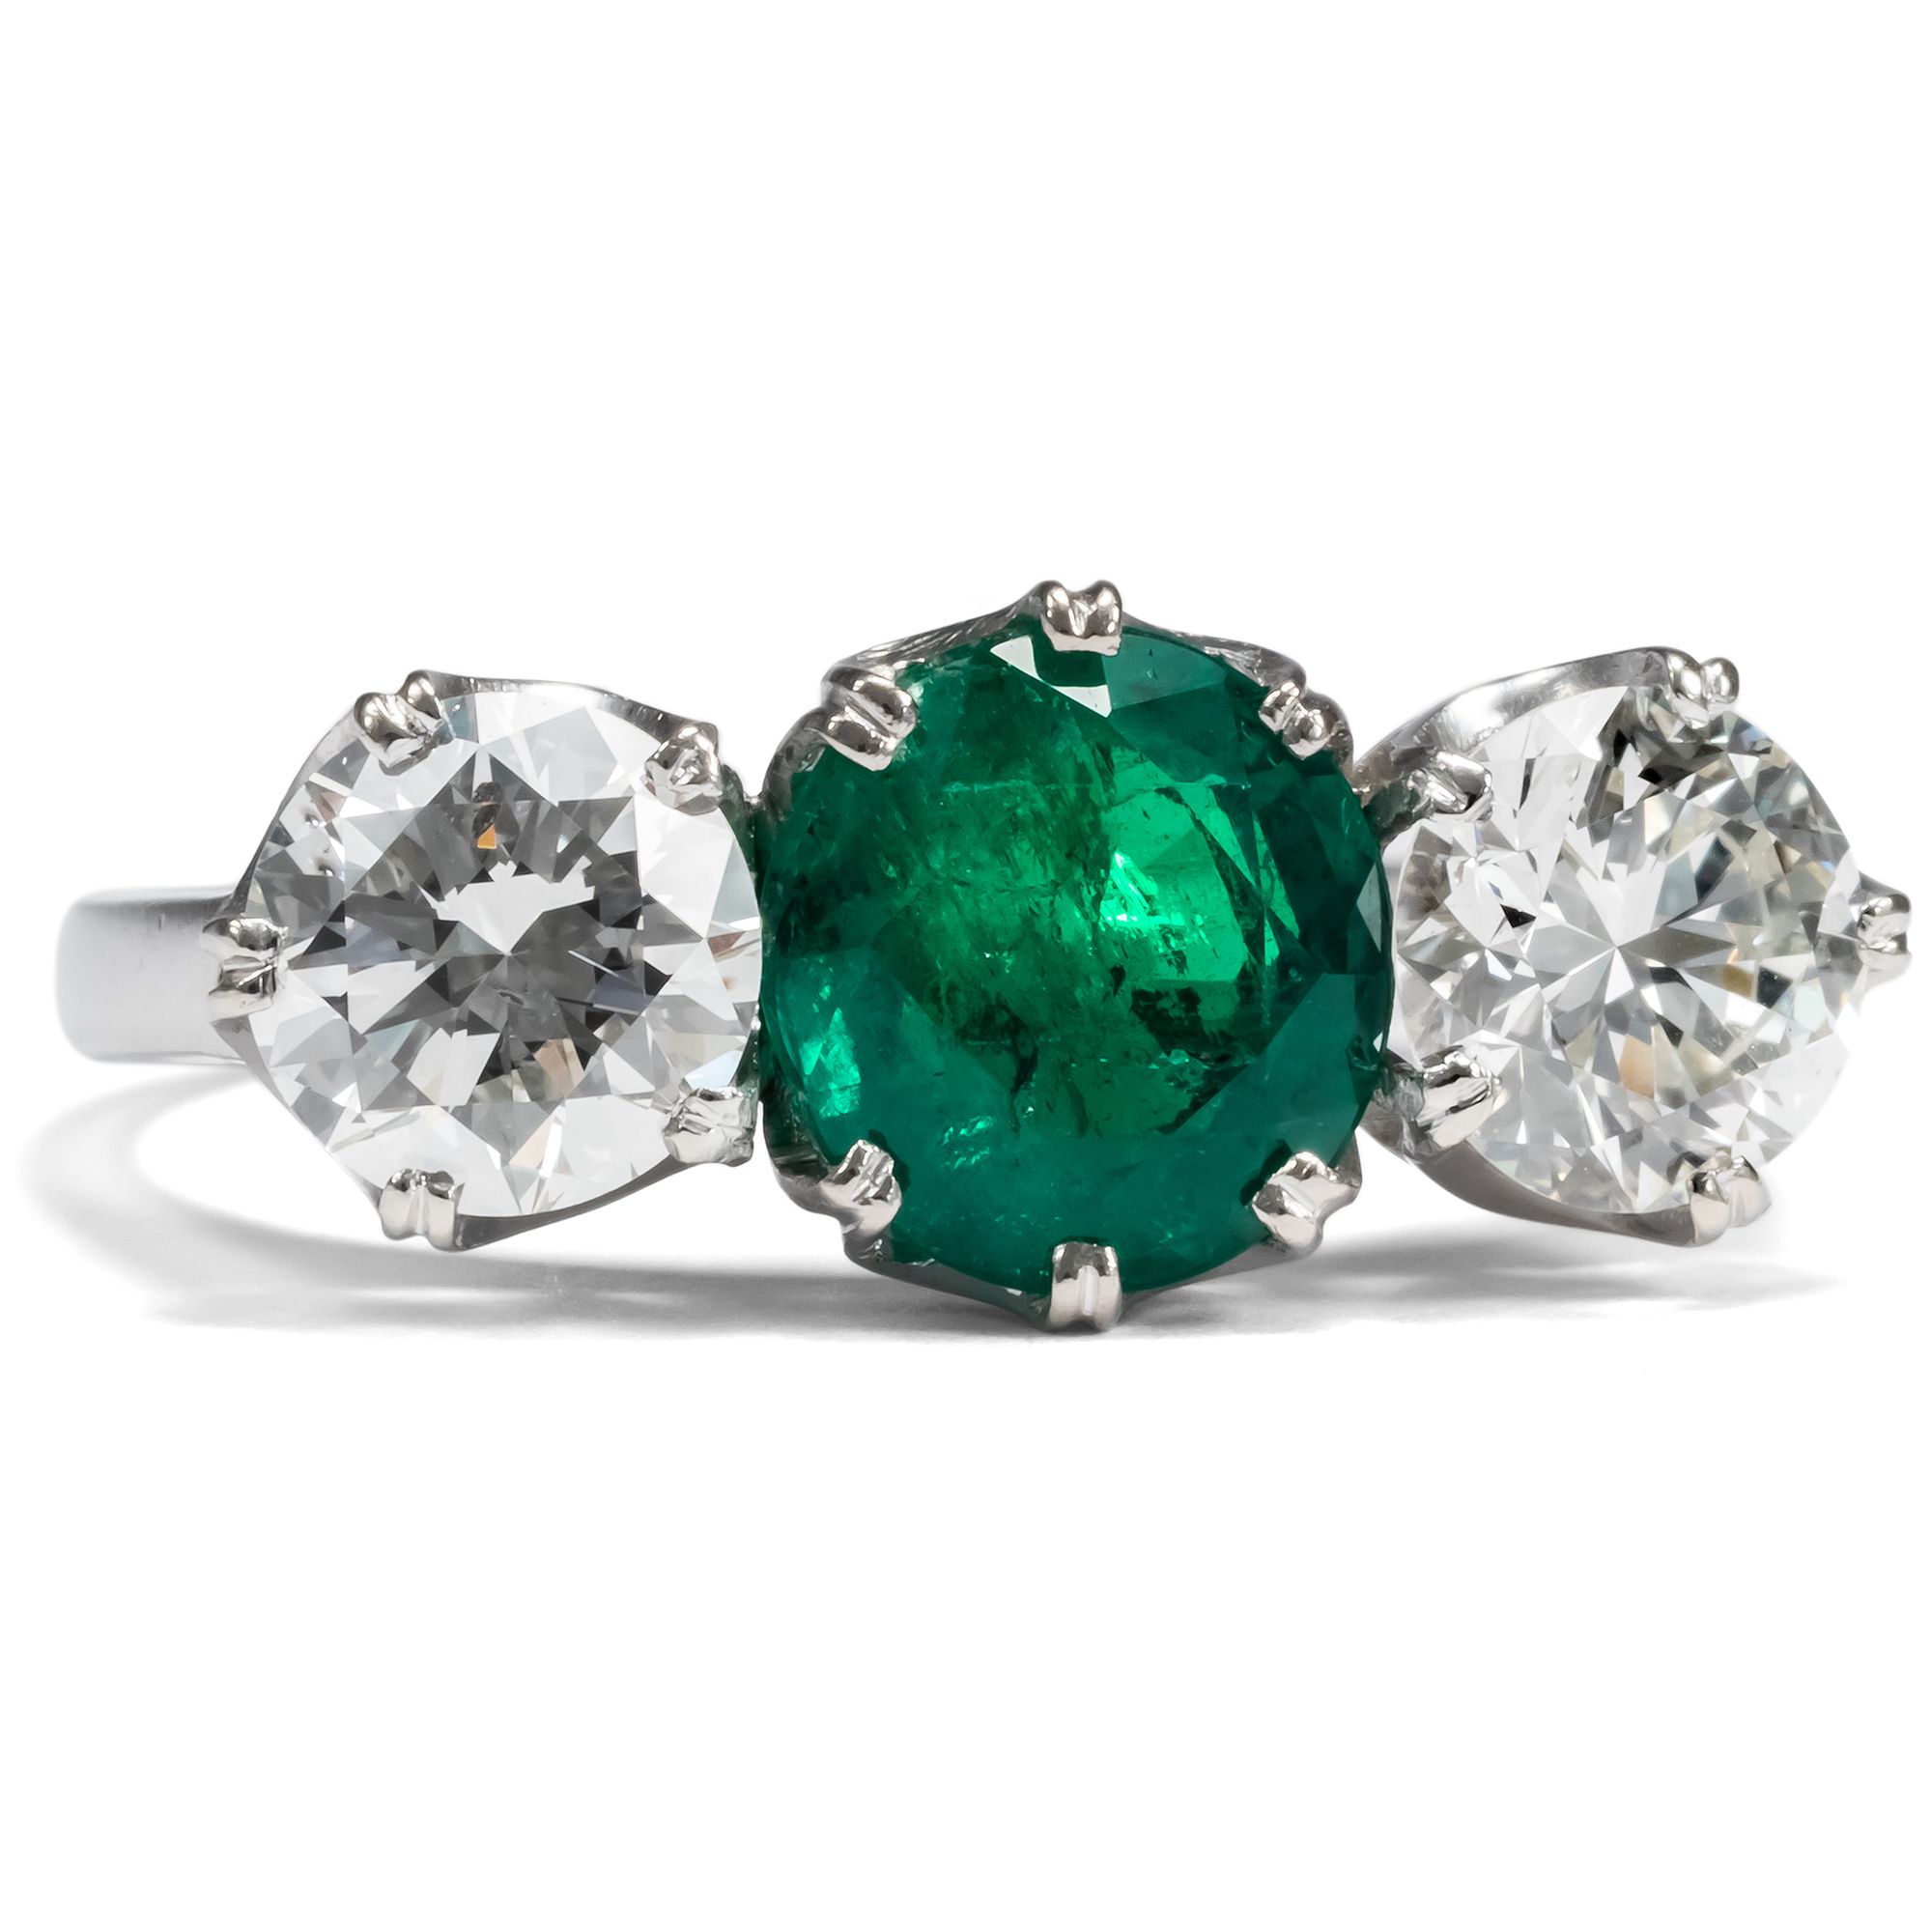 Vintage Ring With Colombian Emerald & Diamonds In White Gold, Vienna Circa 1955